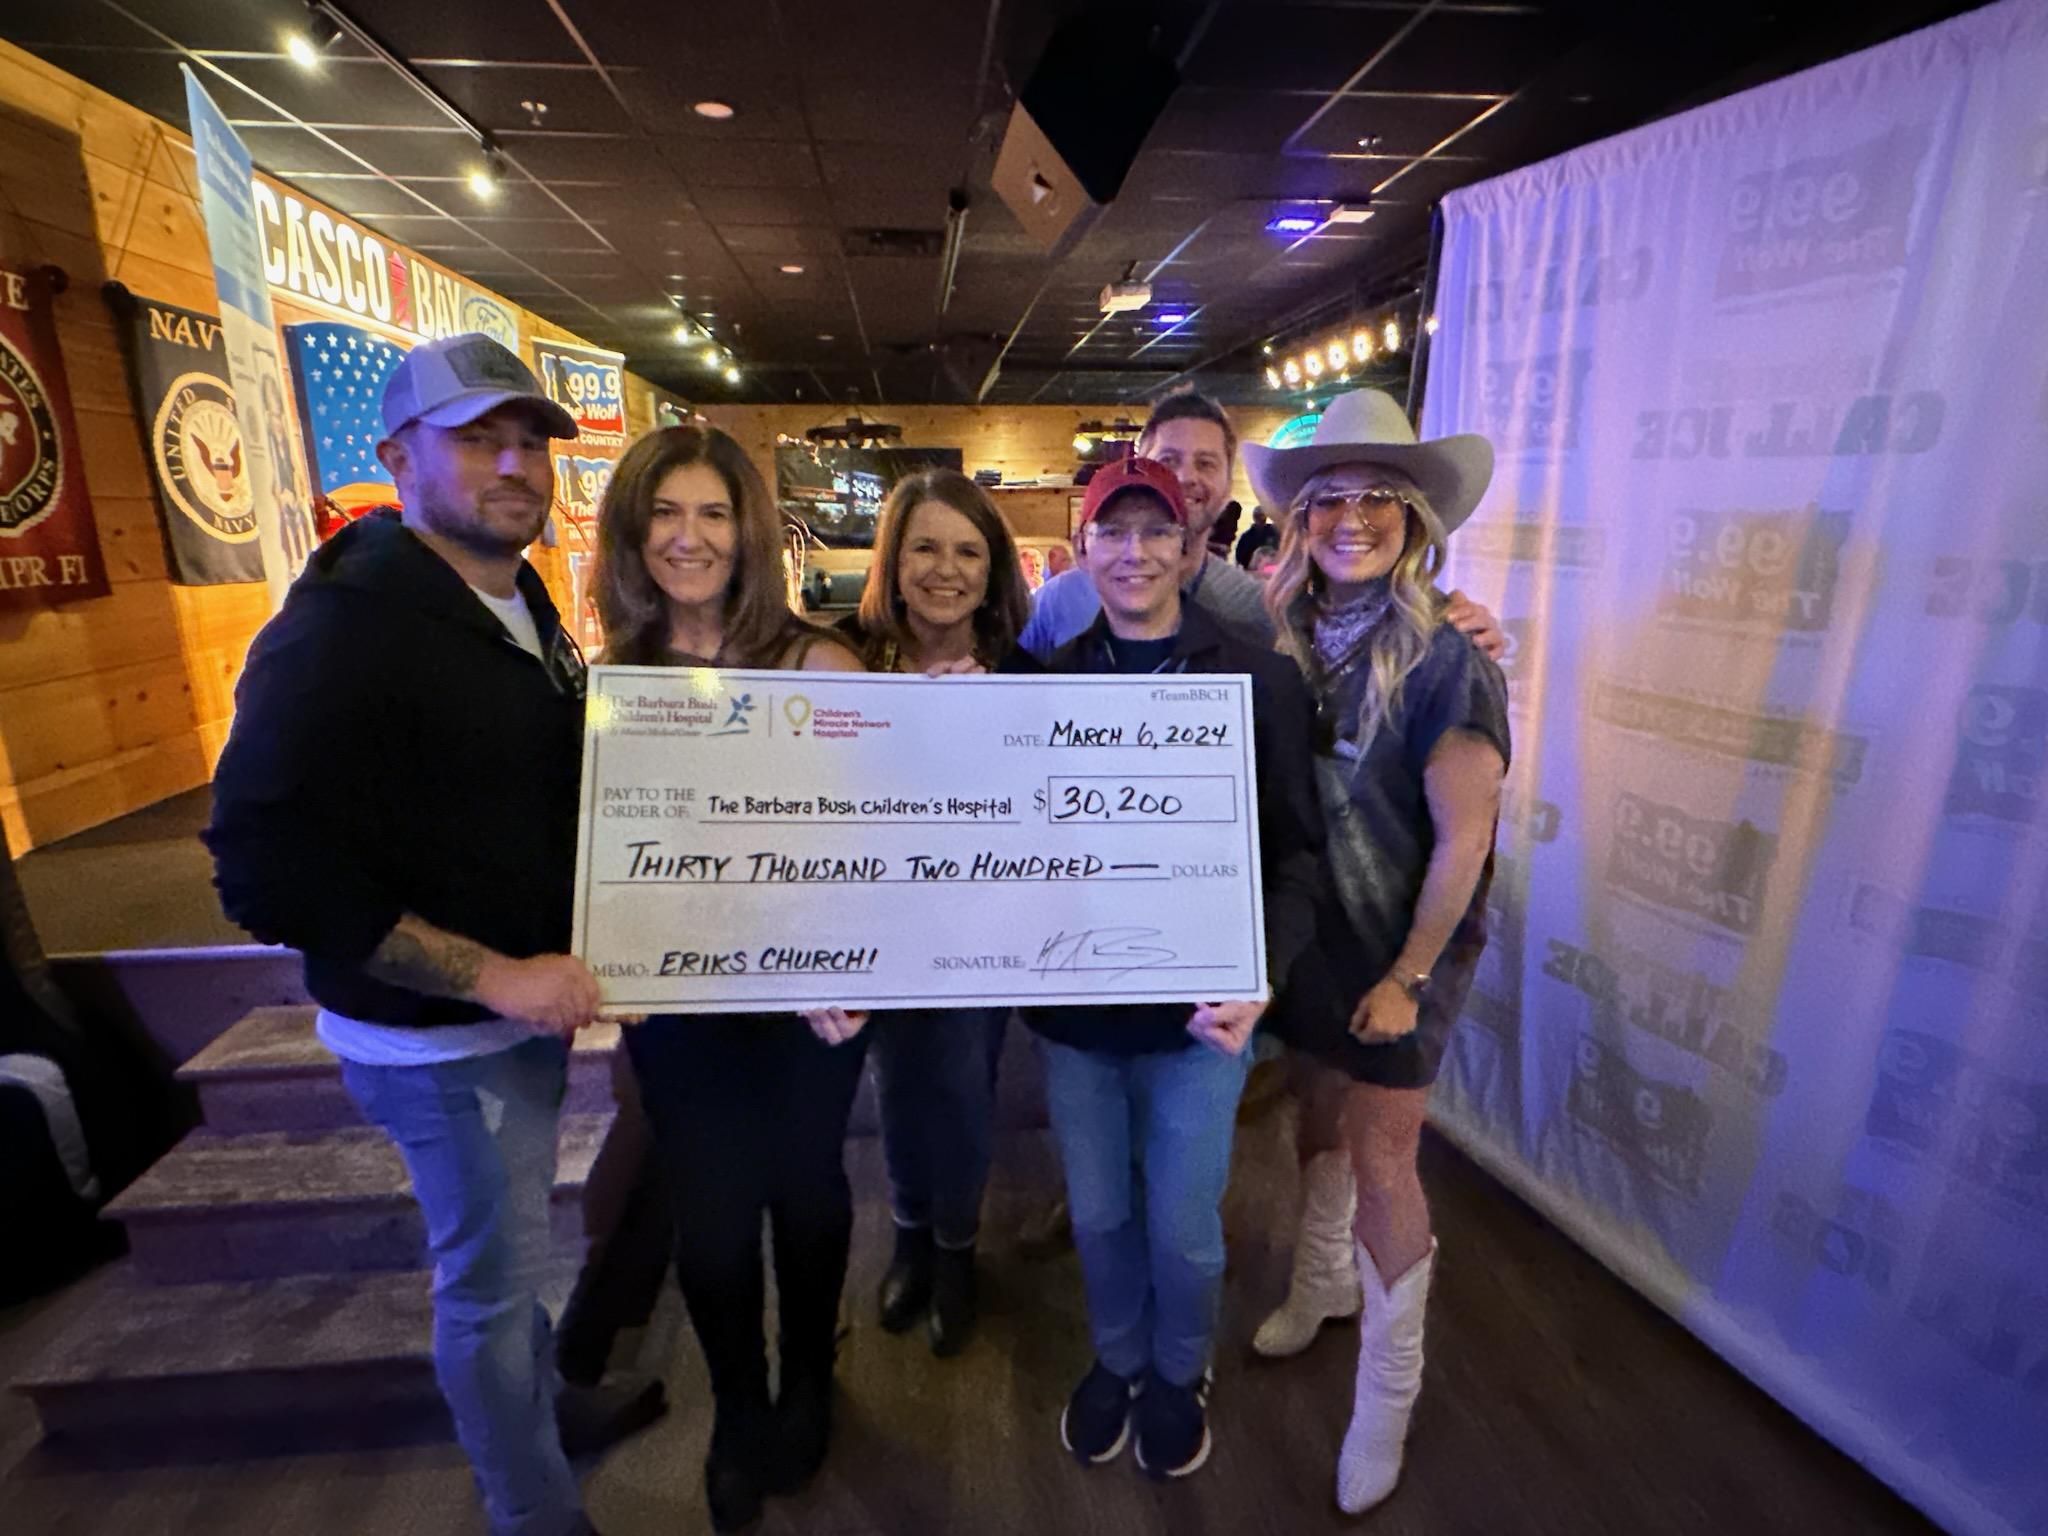 Country 99.9 The Wolf’s Benefit Concert Raises Over $30,000 for Barbara Bush Children’s Hospital